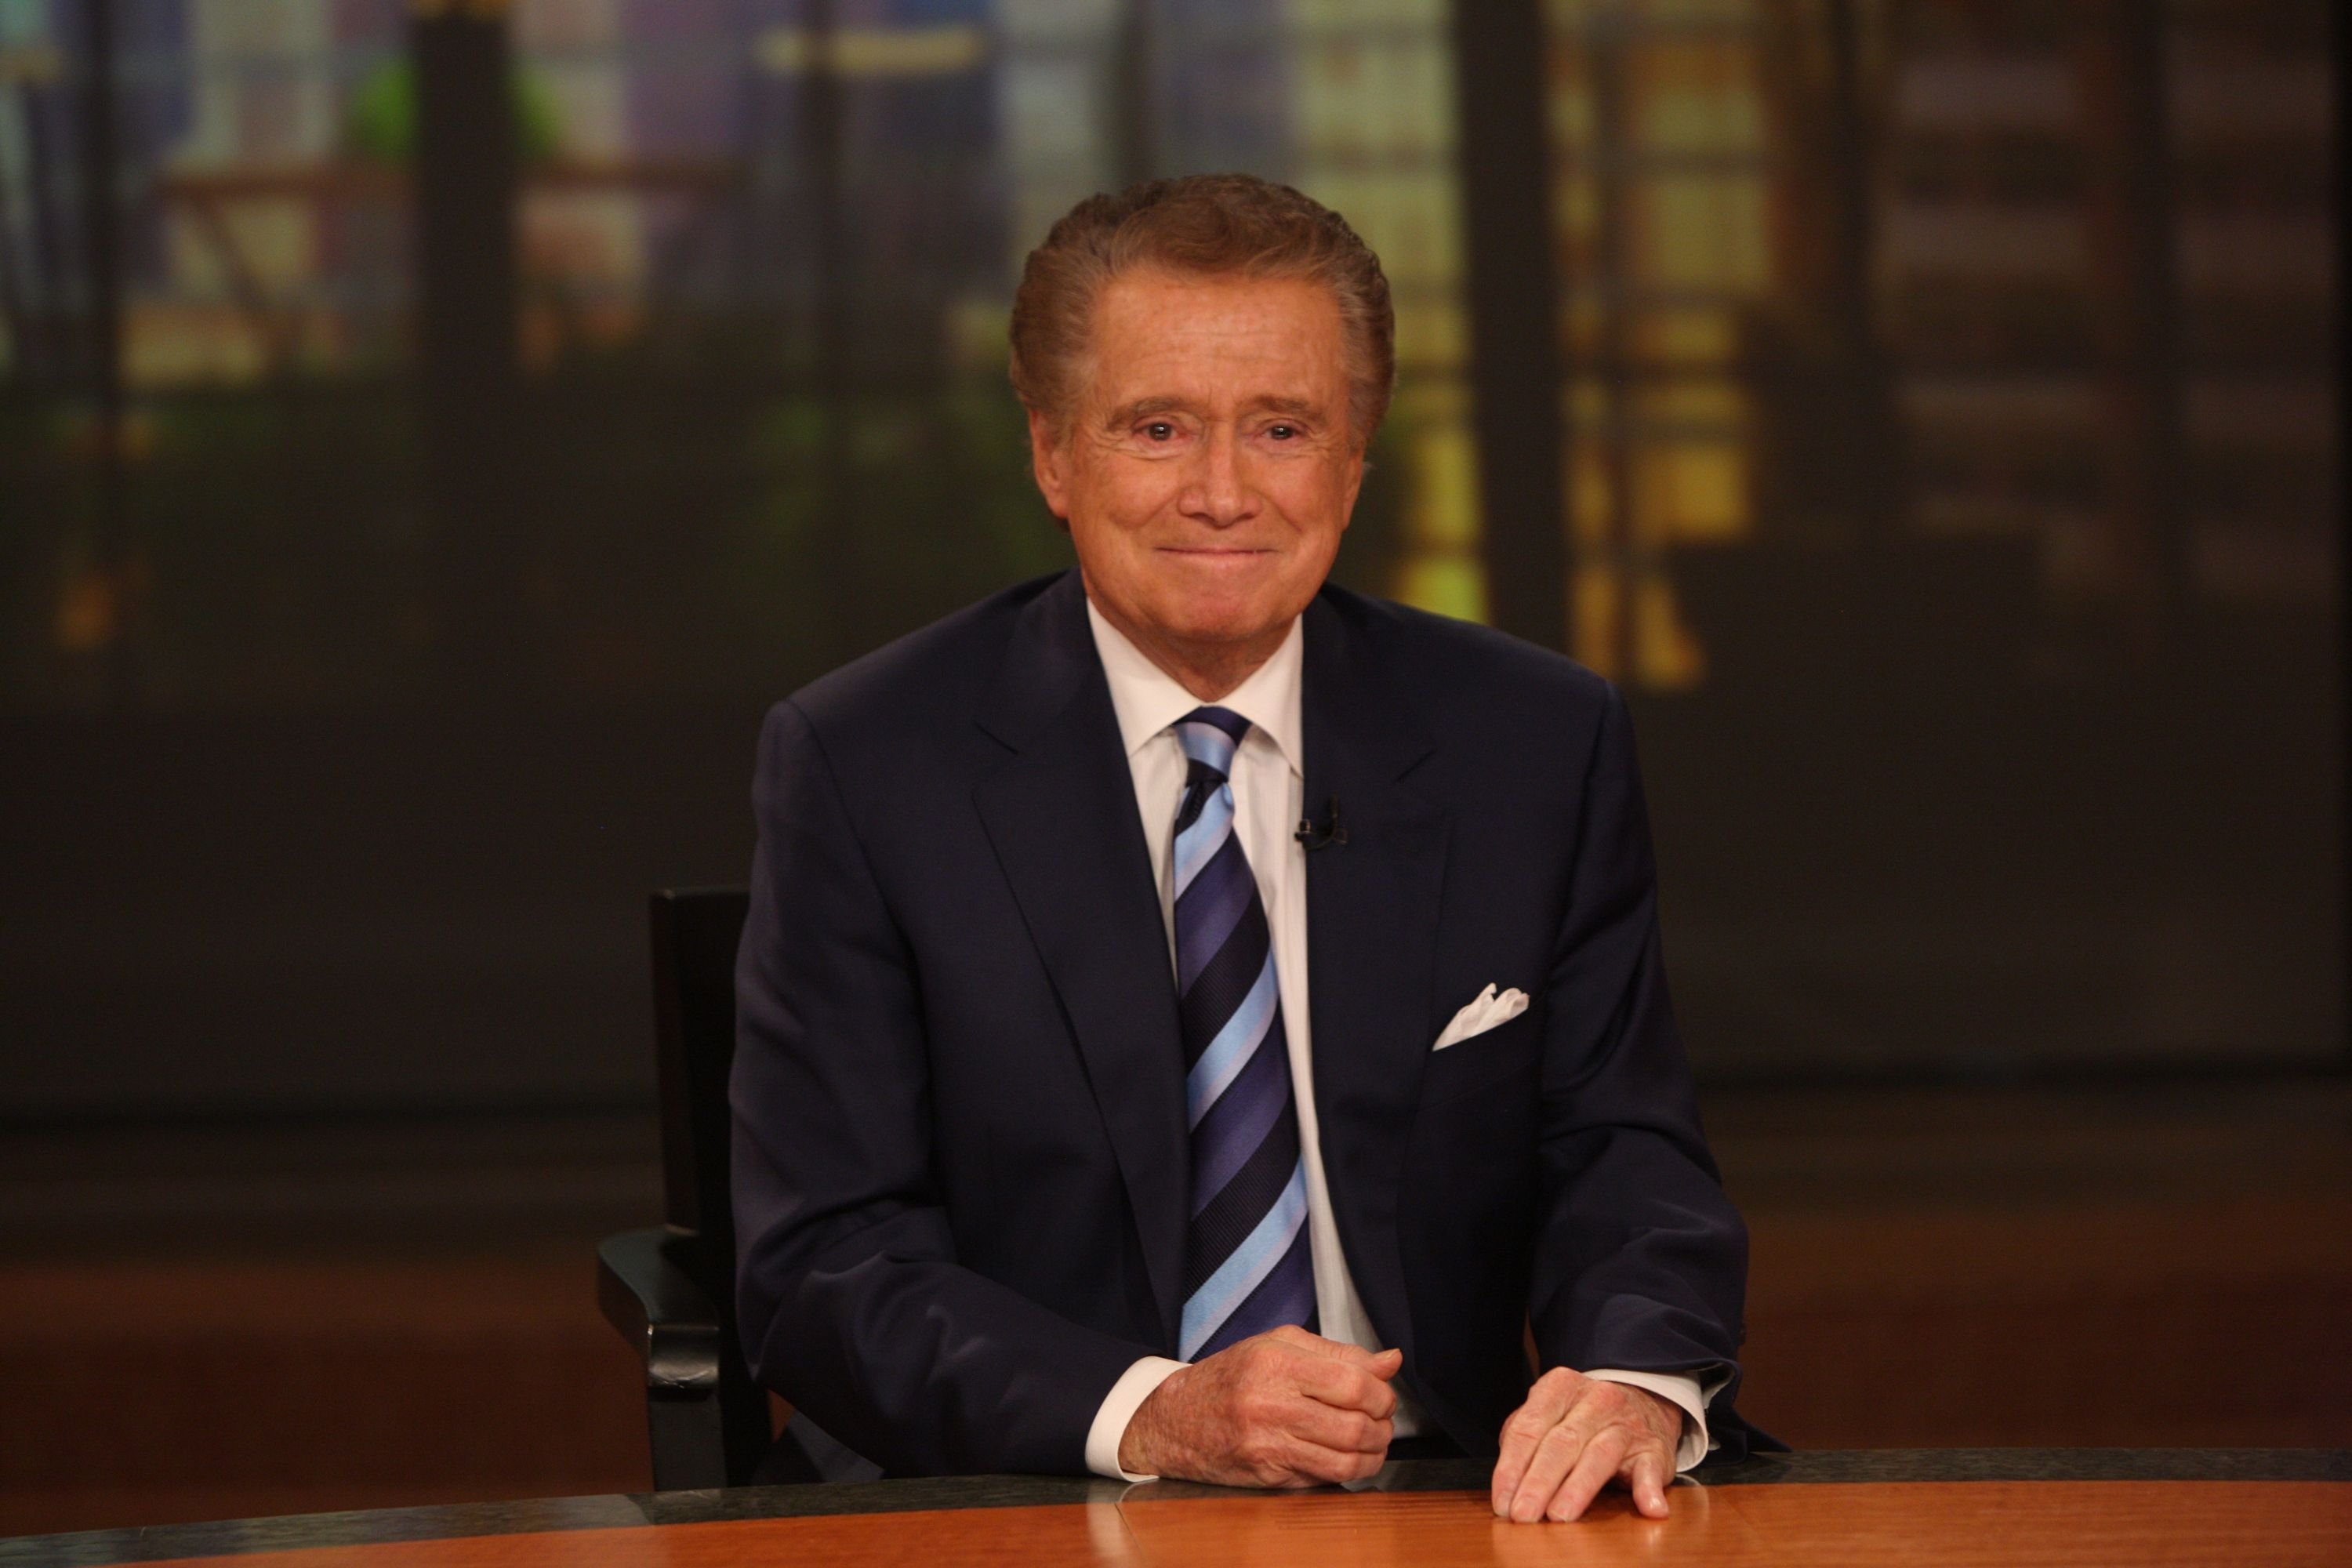 Regis Philbin at a press conference on his departure from "Live! with Regis and Kelly" on November 17, 2011, in New York City. | Source: Bennett Raglin/WireImage/Getty Images